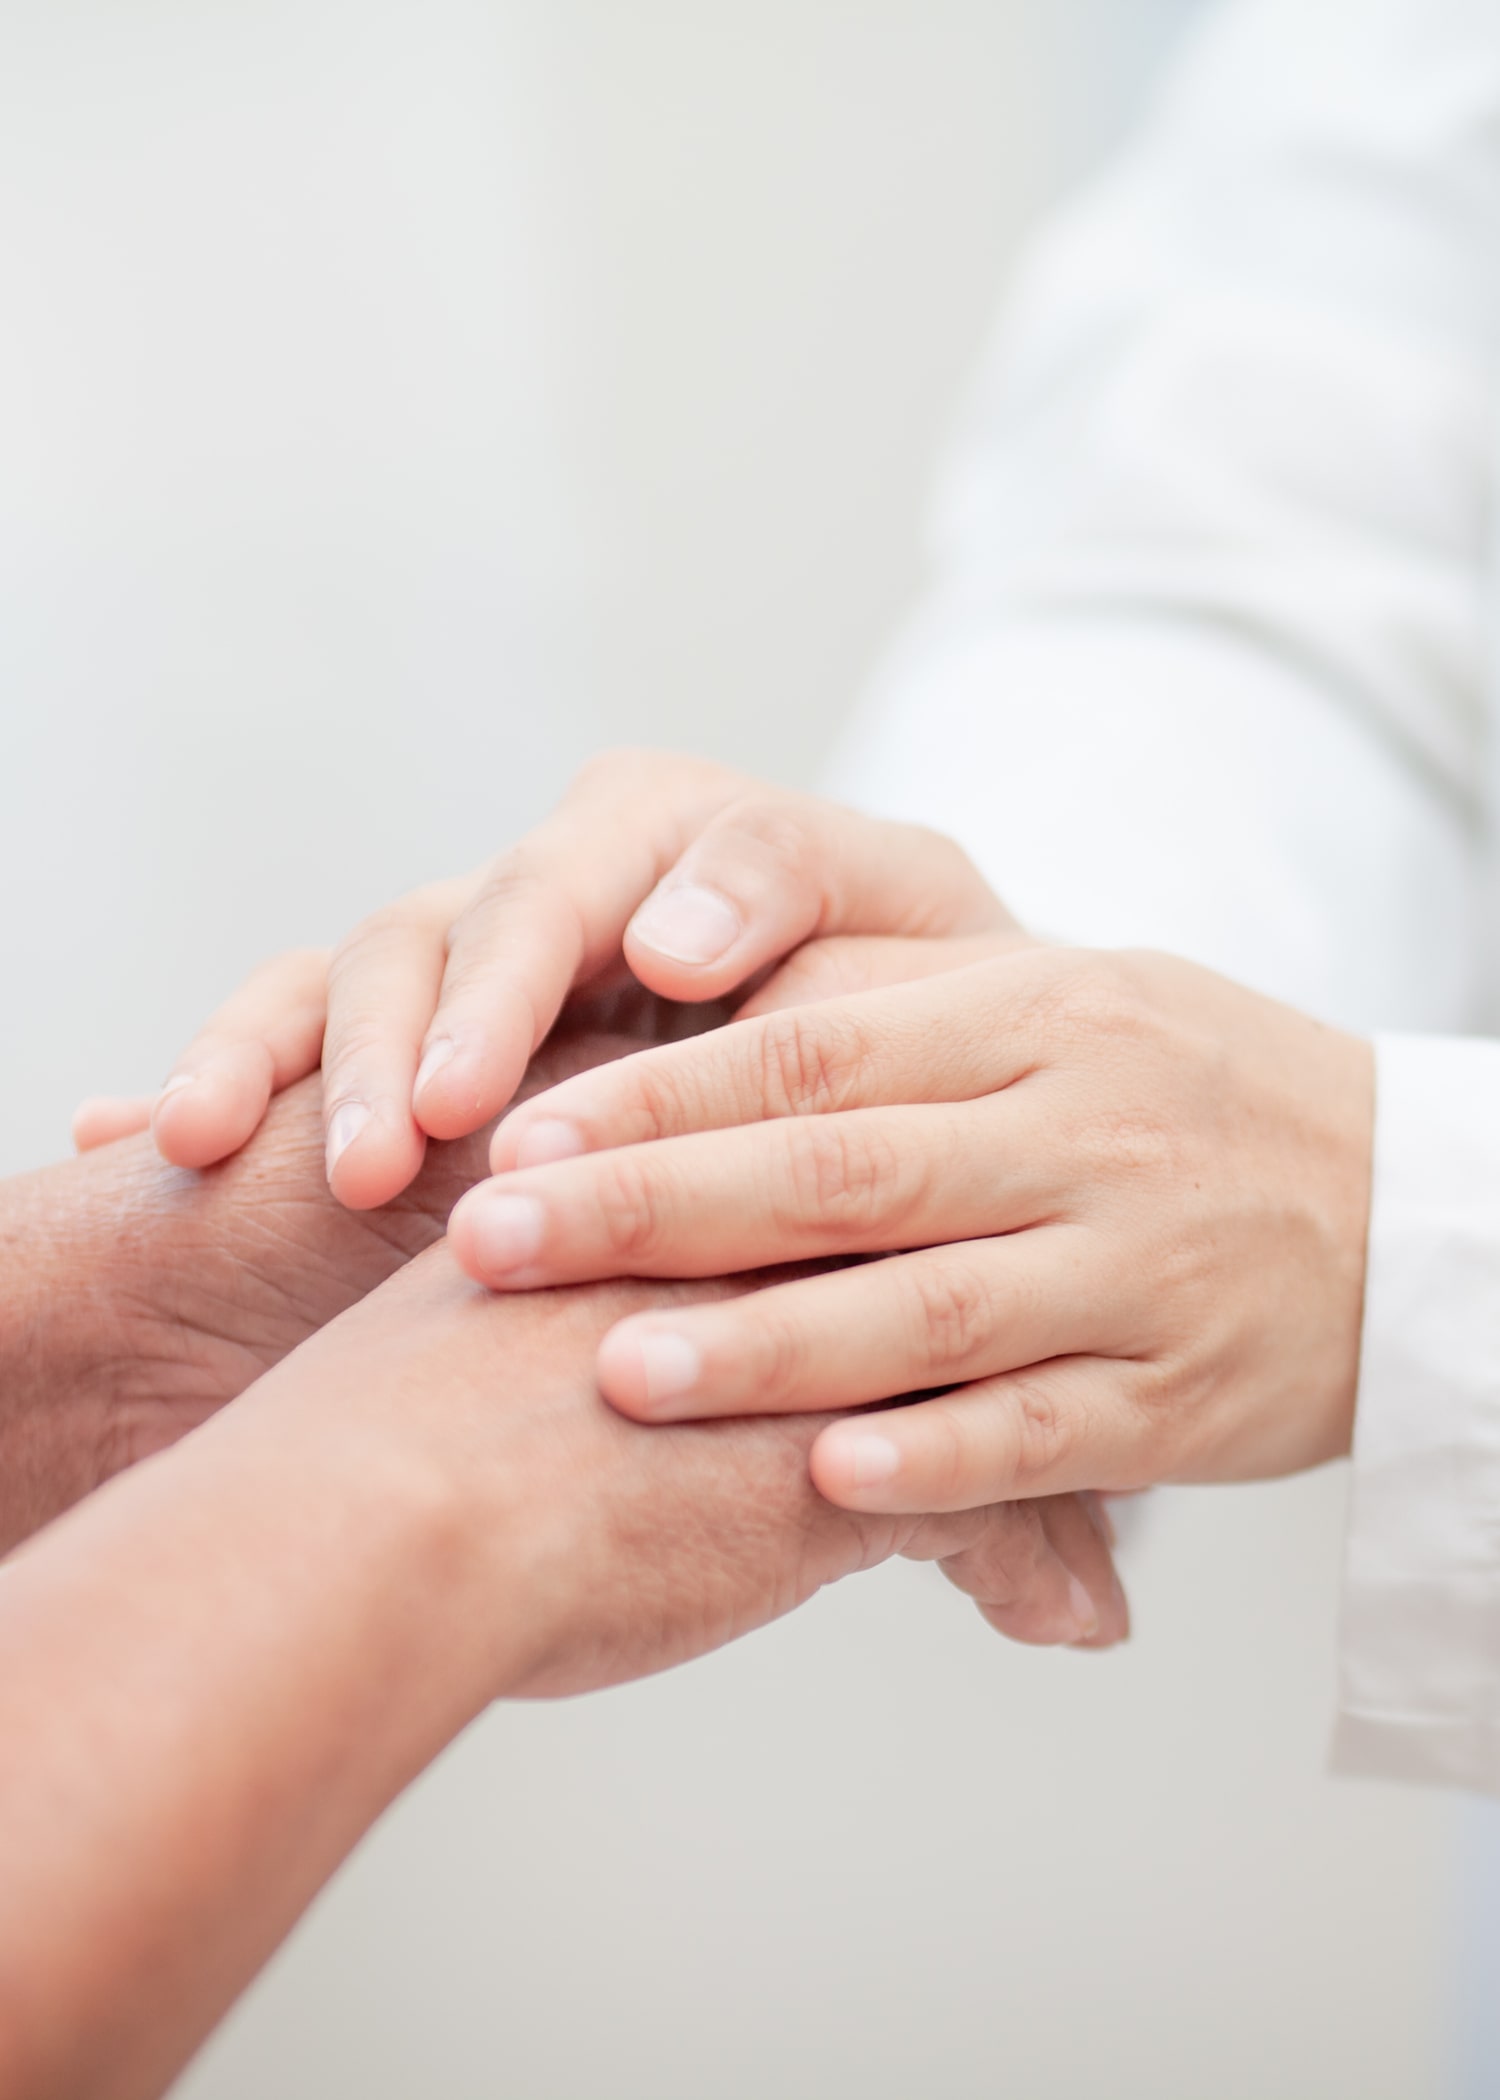 Hands of doctor holding the hand of a patient for the consolation